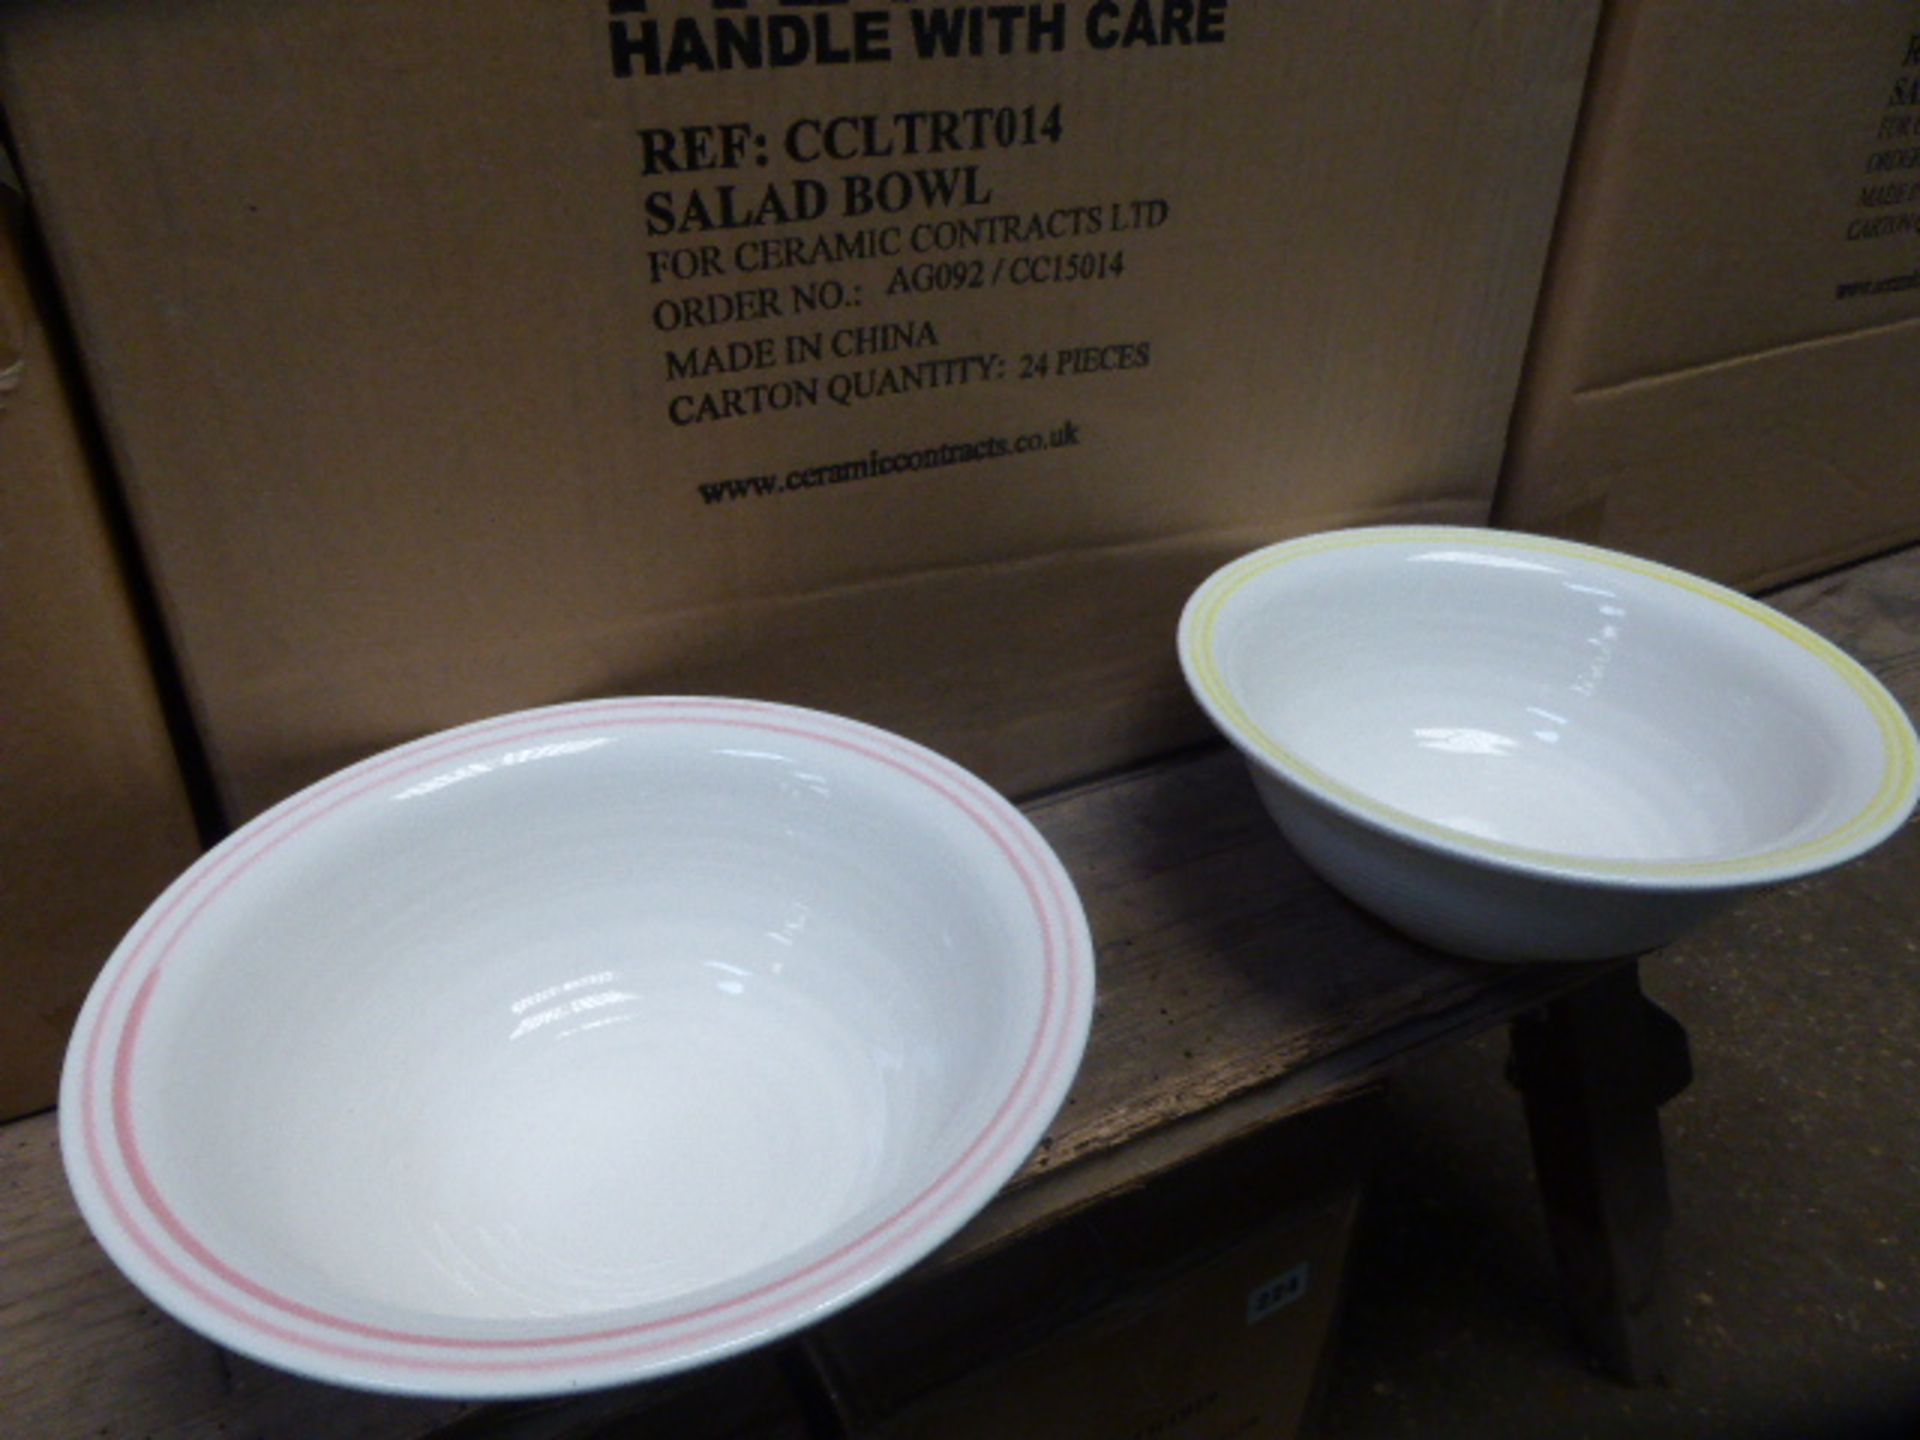 24 19cm salad bowls in white finish with multi coloured rims